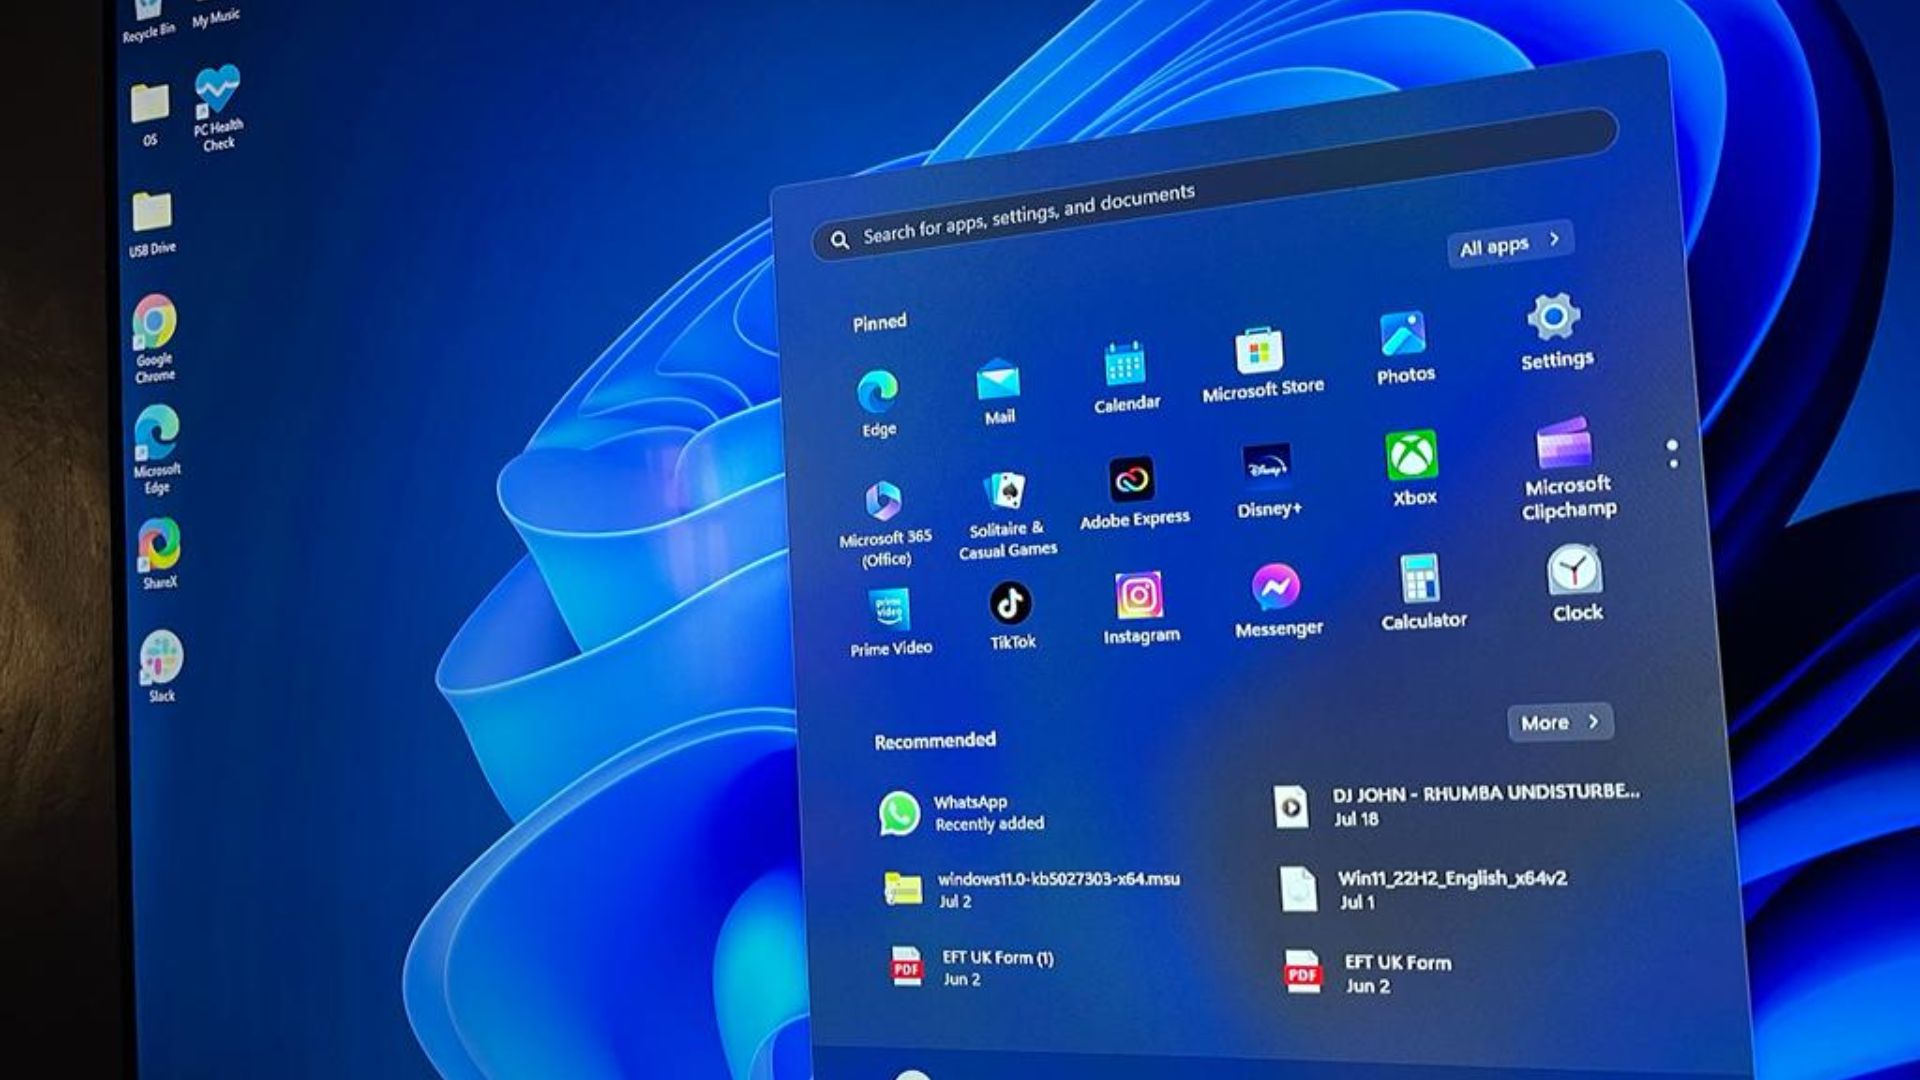 Windows 11 Start menu's performance is "comically bad" says ex-Microsoft Senior Software Engineer despite using a sophisticated $1,600 PC that meets stringent minimum requirements